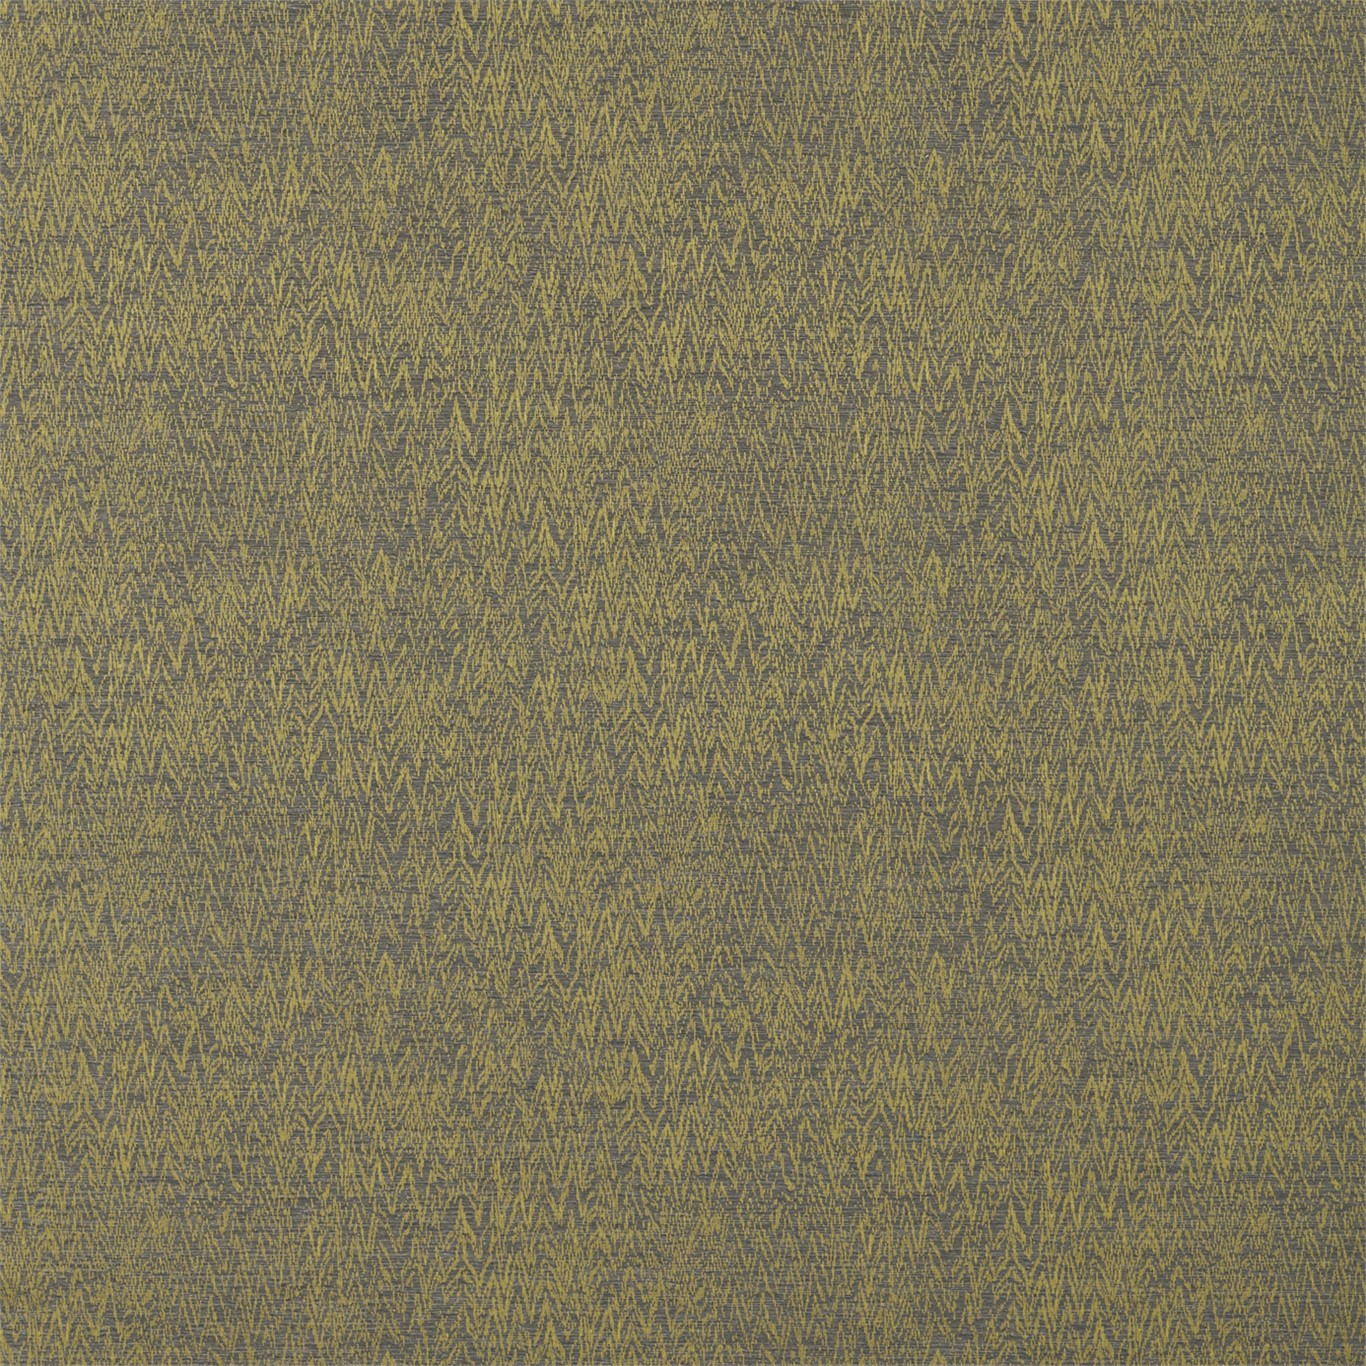 Aves Linden Fabric by HAR